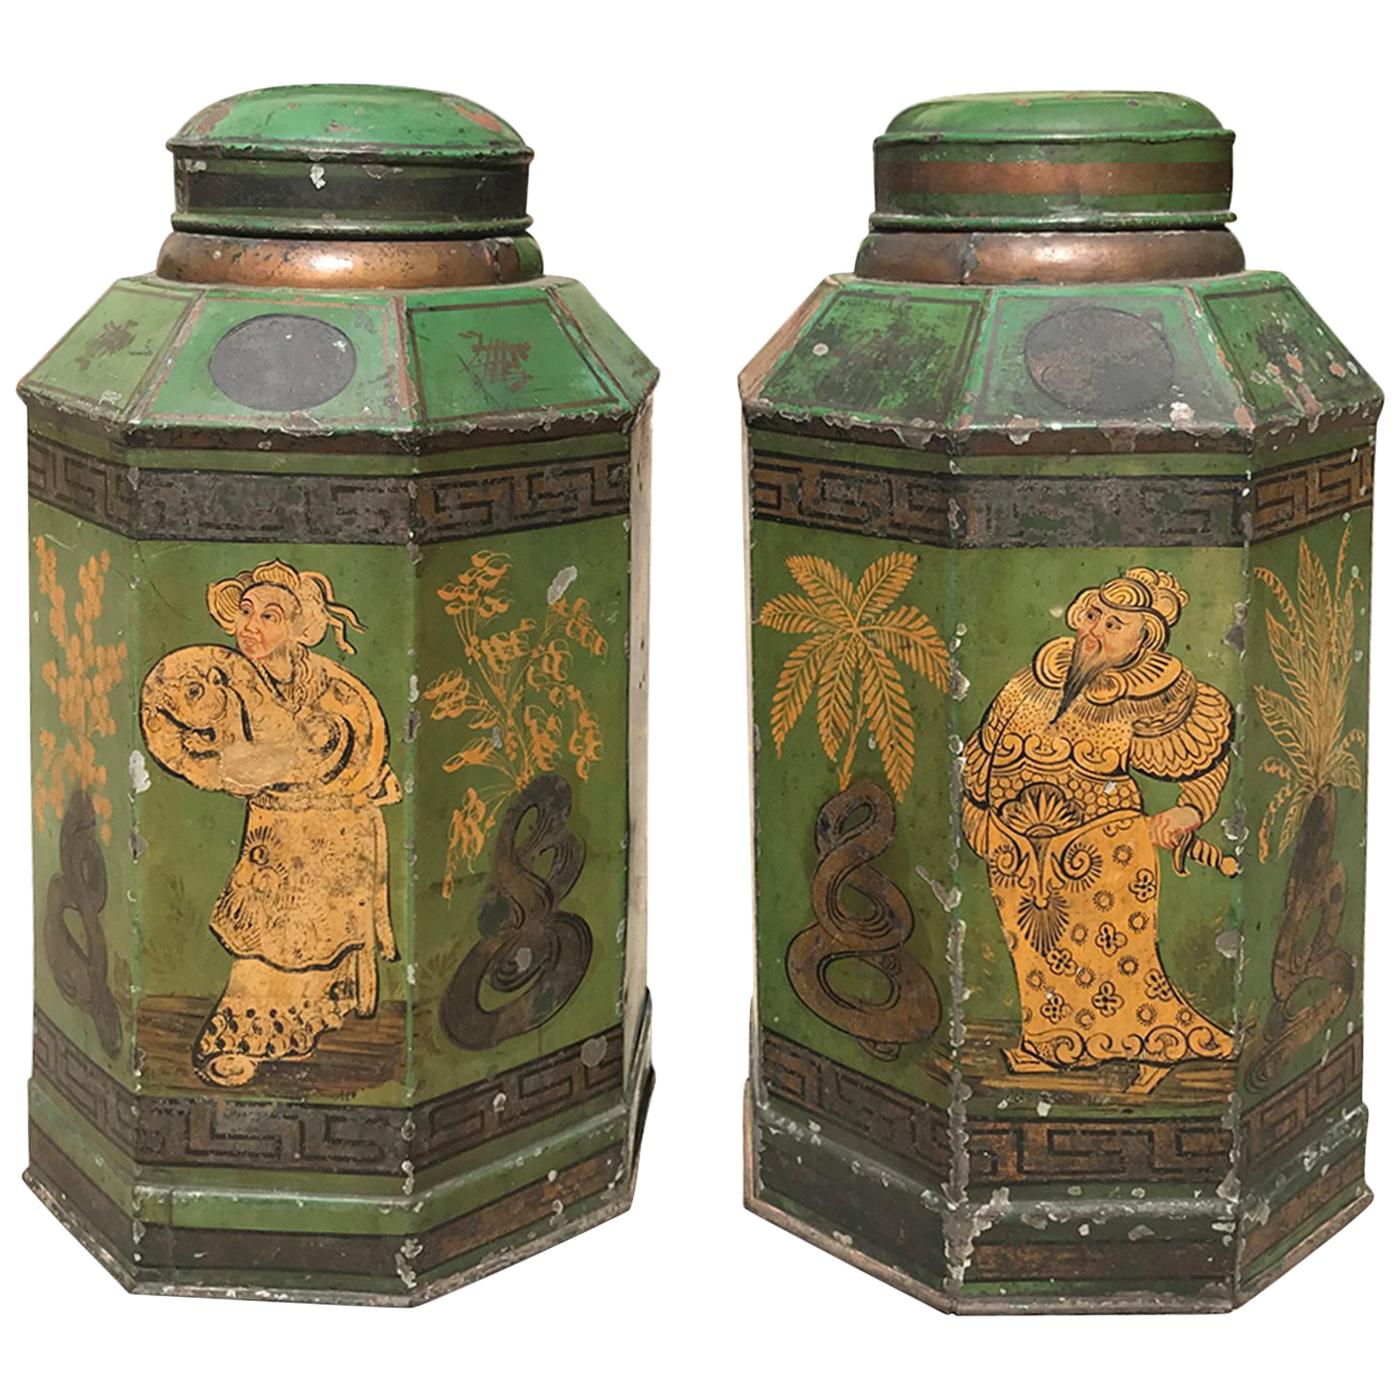 Pair of English Tole Tea Tins, Old Chipped Paint, circa 1830s